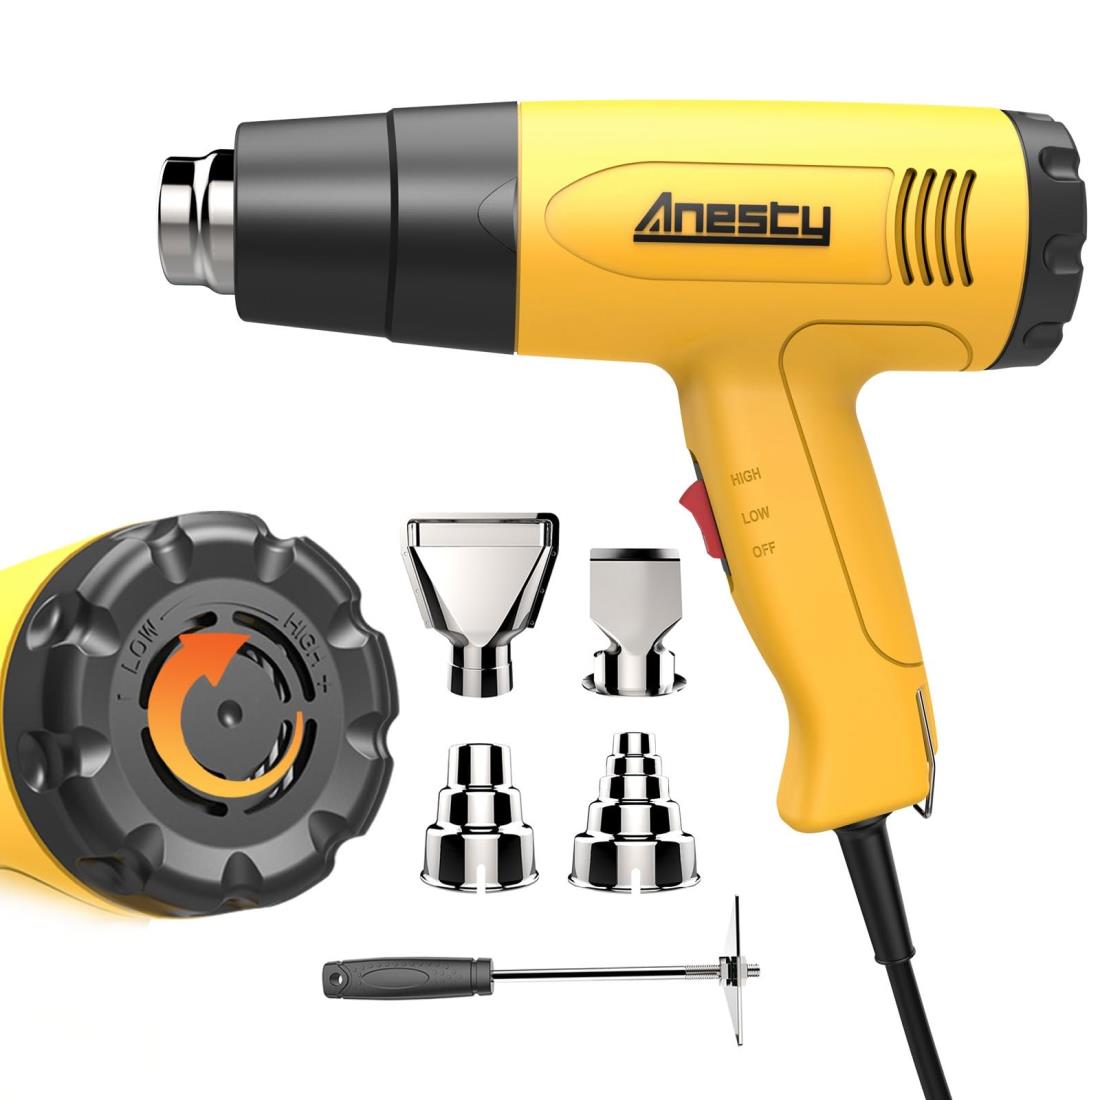 Anesty Multi-Purpose Heat Gun Combines Stepless Temperature and 2 Modes Hot Air Product Specifications: Temperature: 122 - 140°F (50 - 600°C) (HIGH) 122 - 104°F (50 - 400°C) (LOW) Air Flow: 10.9 gal/min (400 L/min) (strong wind) 65.6 gal/min (250 L/min) (weak wind) Power Supply: 100 V AC 50/60 Hz Maximum power consumption: 1,500 W. Cord Length: Approx. 4.9 ft (1.5 m) Product Weight: Approx. 1.7 lbs (0.75 kg). Product Size: Approx. 9.6 x 7.3 x 2.6 inches (24.5 x 18.5 x 6.5 [Use columns] For car maintenance For repairing smartphones. For PVC work. For stripping work. For heat treatment processing. For drying.